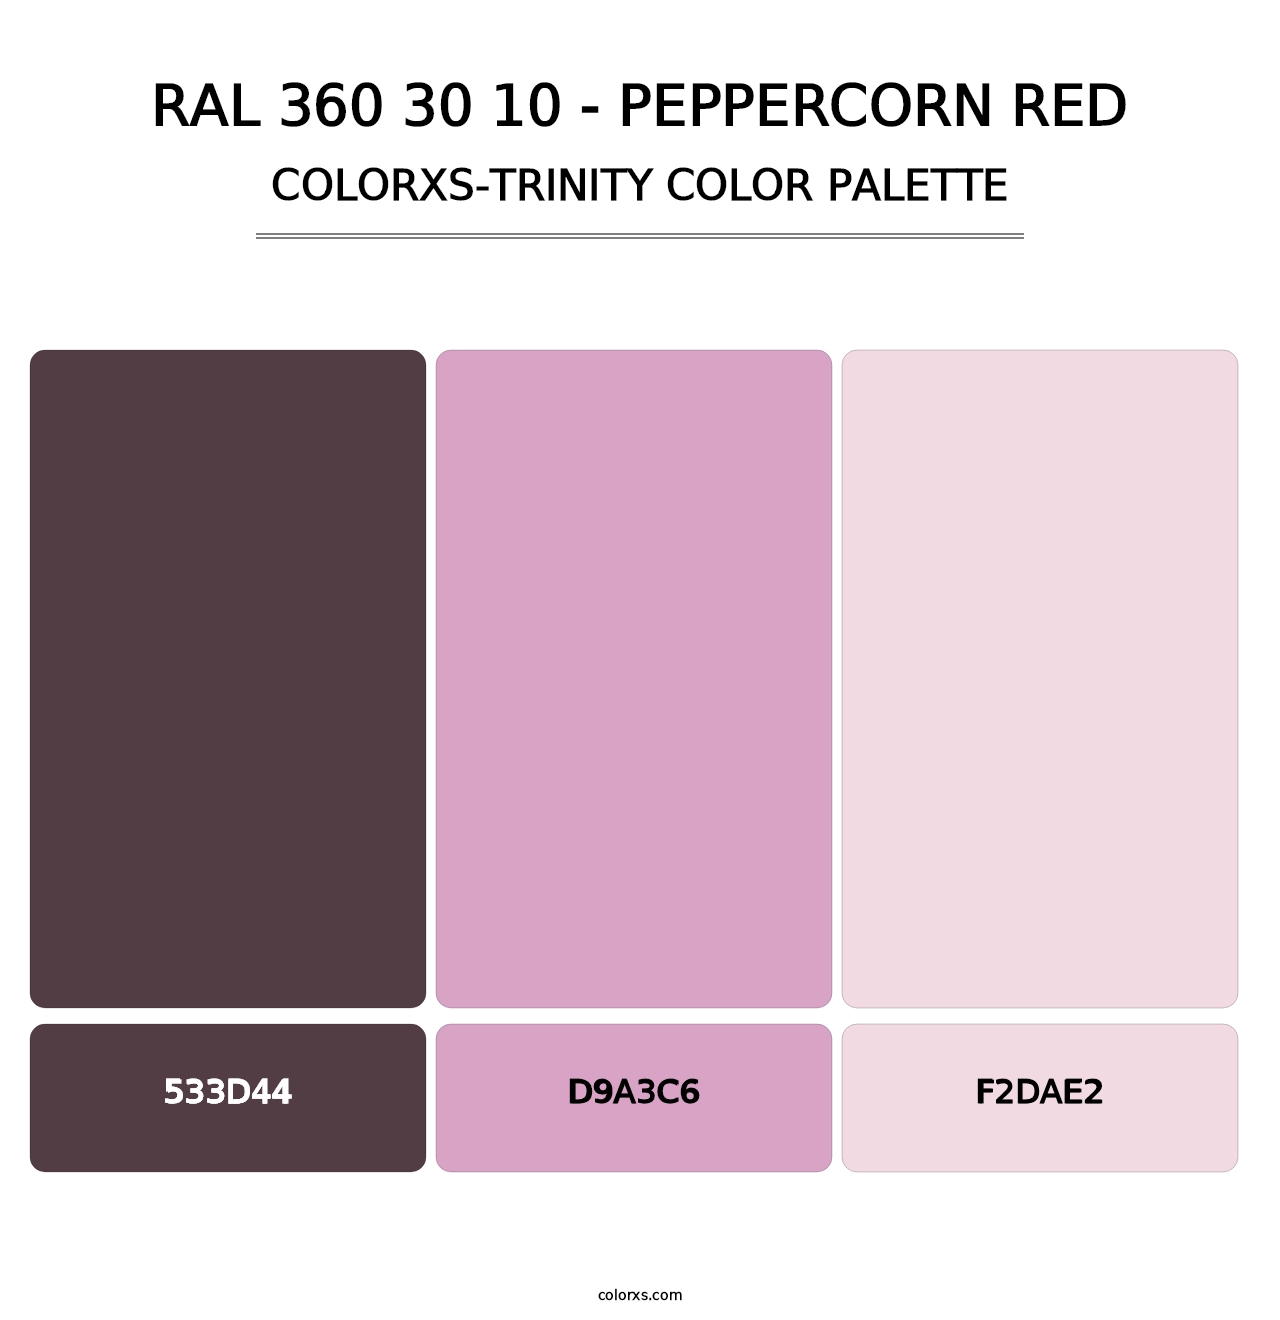 RAL 360 30 10 - Peppercorn Red - Colorxs Trinity Palette